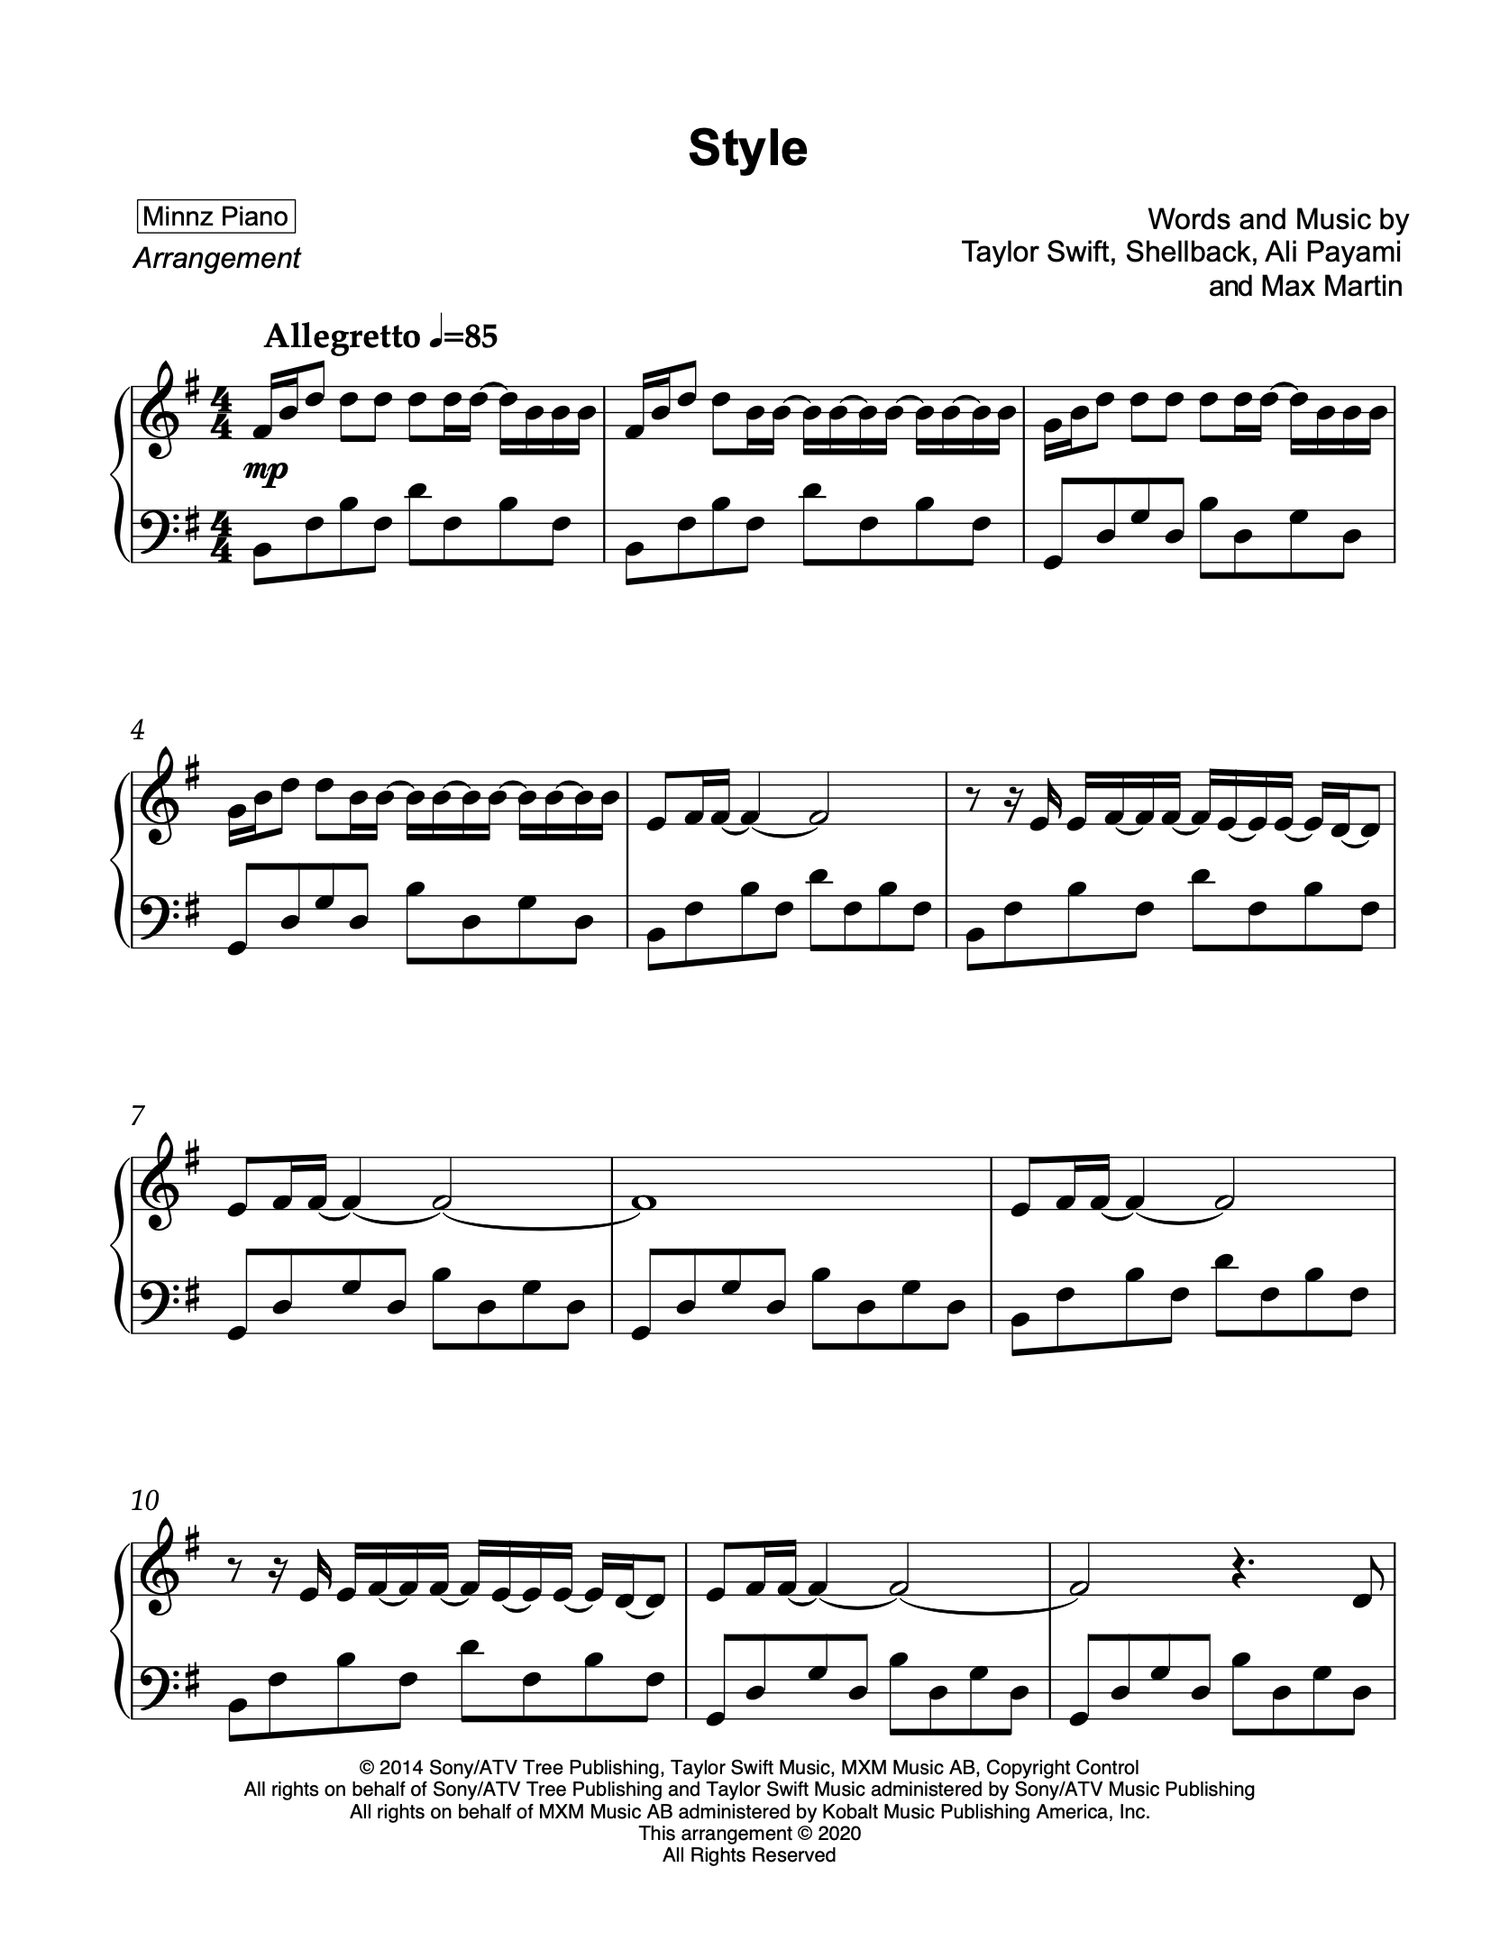 PLAY THE GAME TONIGHT Sheet Music - 1 Arrangement Available Instantly -  Musicnotes